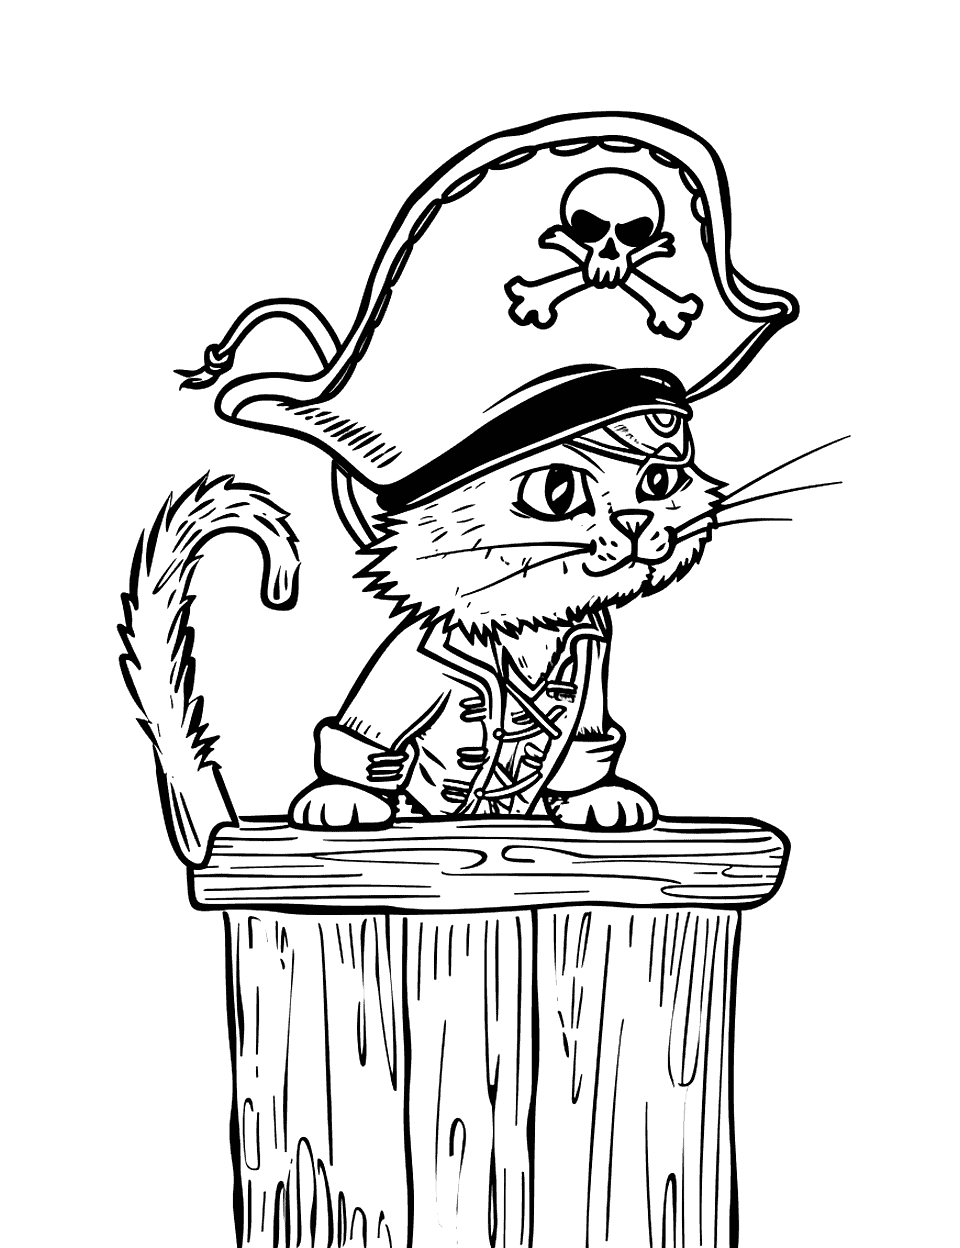 Ship’s Cat on the Lookout Pirate Coloring Page - A cat wearing a pirate hat, perched on the lookout.